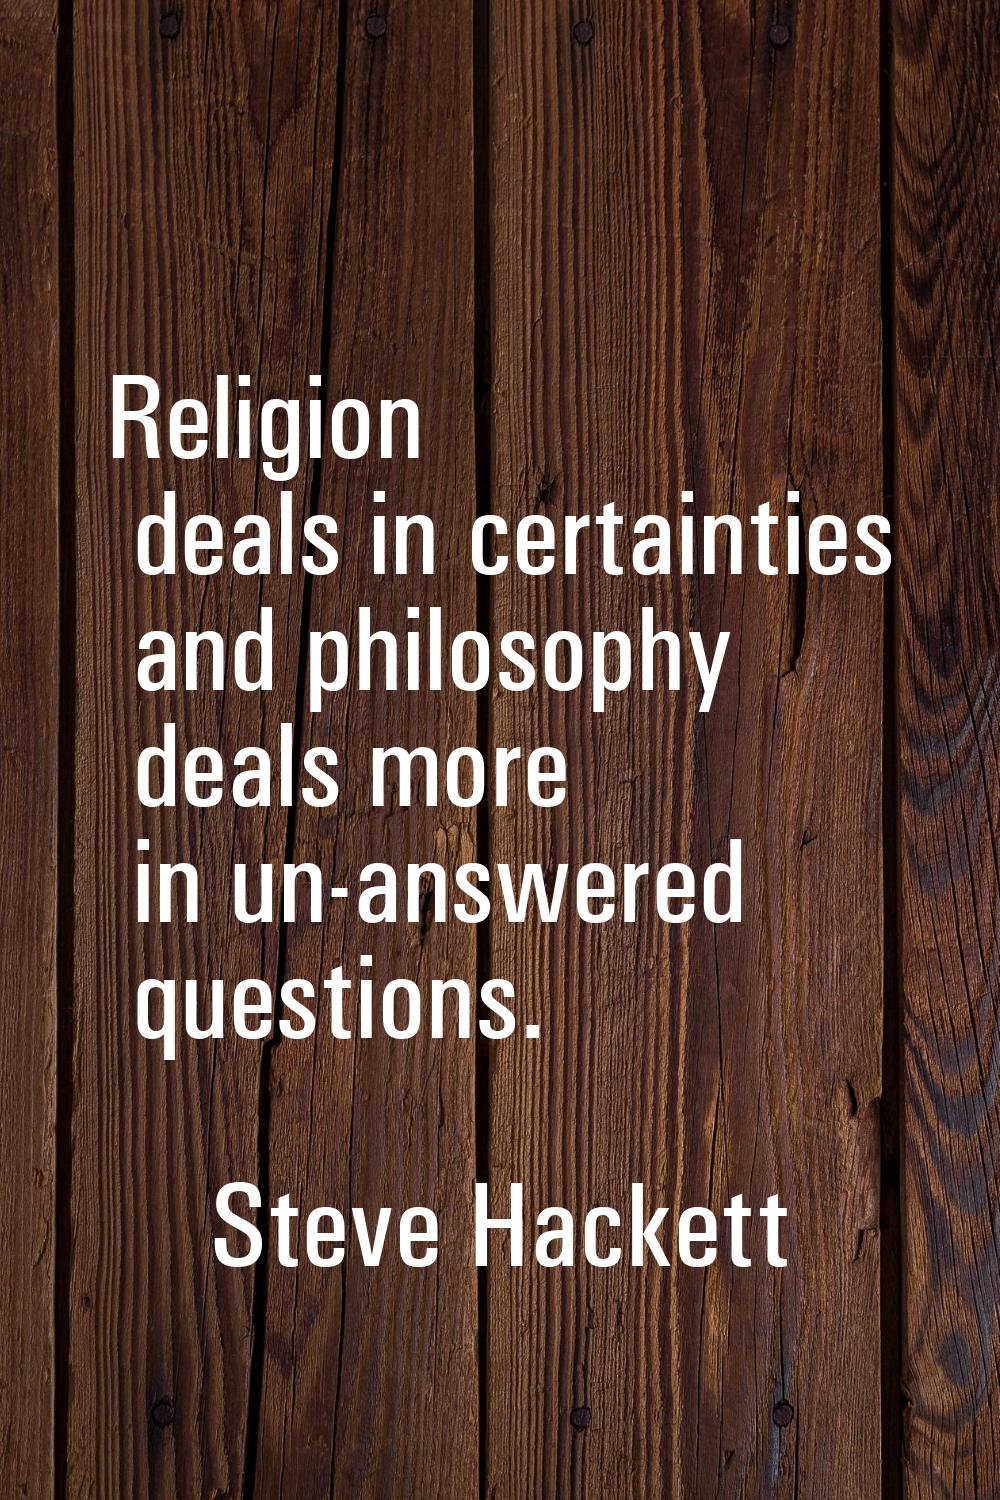 Religion deals in certainties and philosophy deals more in un-answered questions.